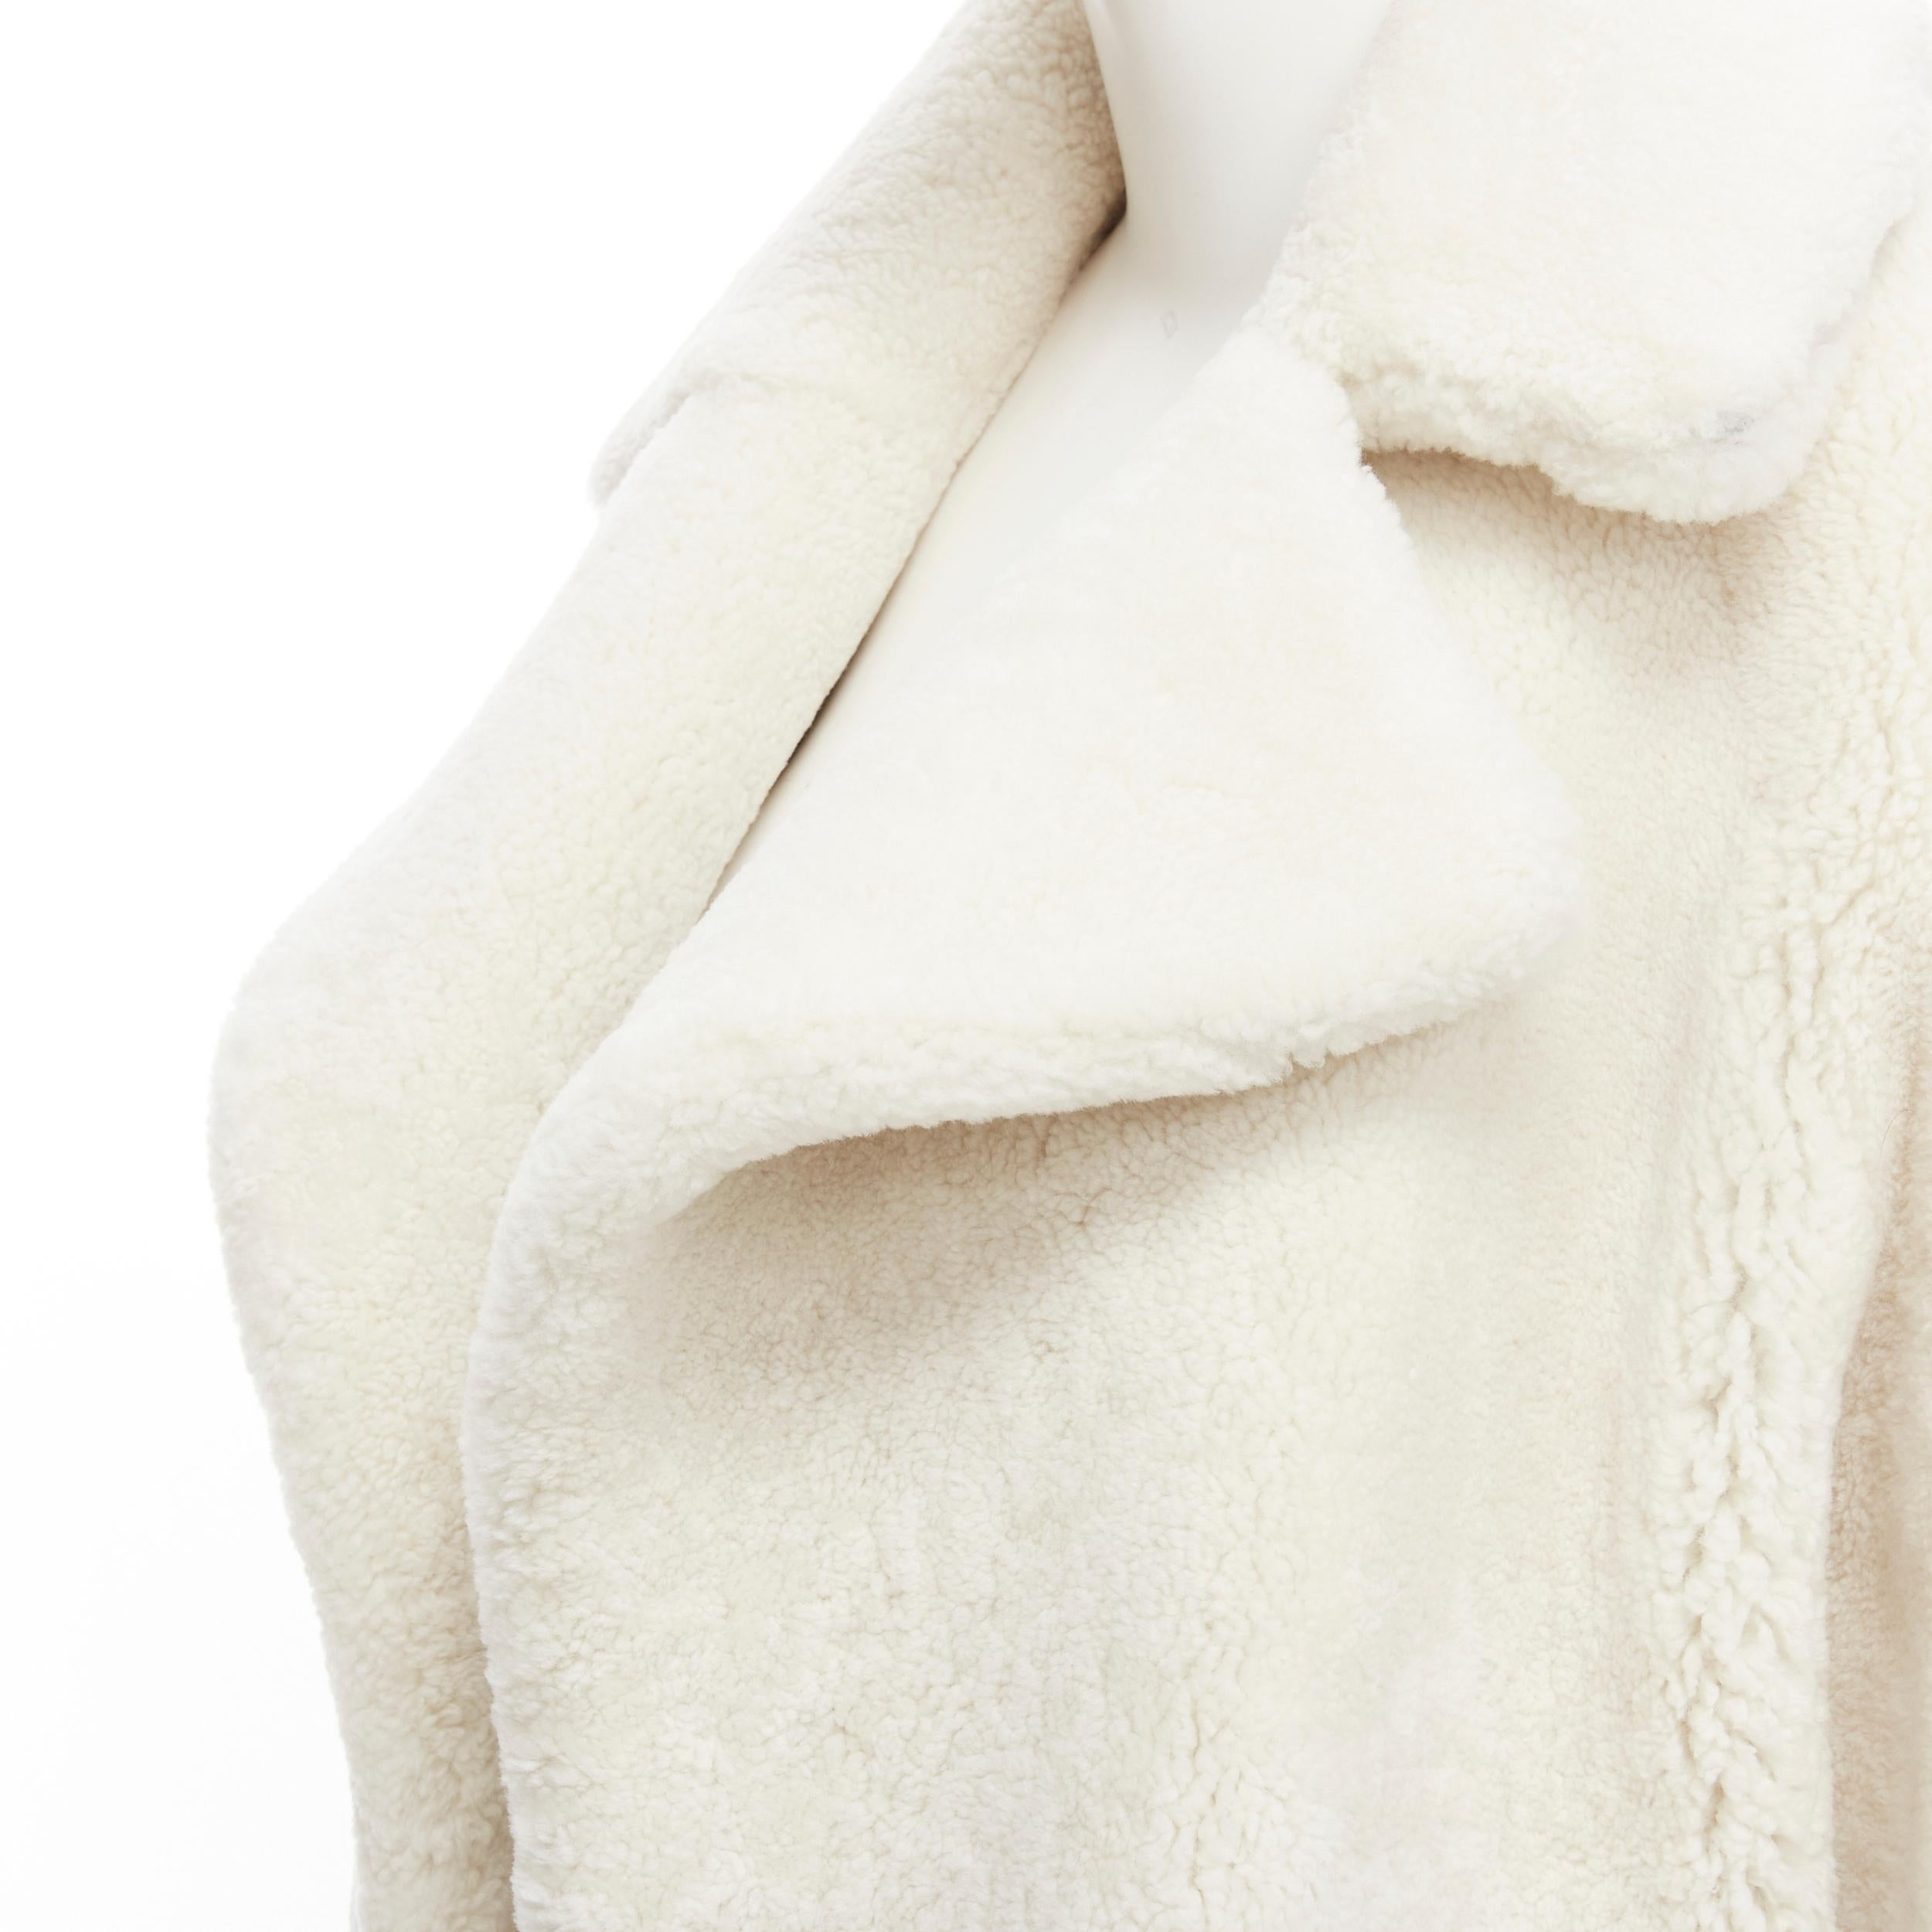 MARTIN GRANT 100% lambskin shearling white oversized Teddy winter coat FR36 S 
Reference: LNKO/A01843 
Brand: Martin Grant 
Designer: Anya Hindmarch 
Material: Lambskin 
Color: White 
Pattern: Solid 
Extra Detail: Open front. Dual slit pockets.